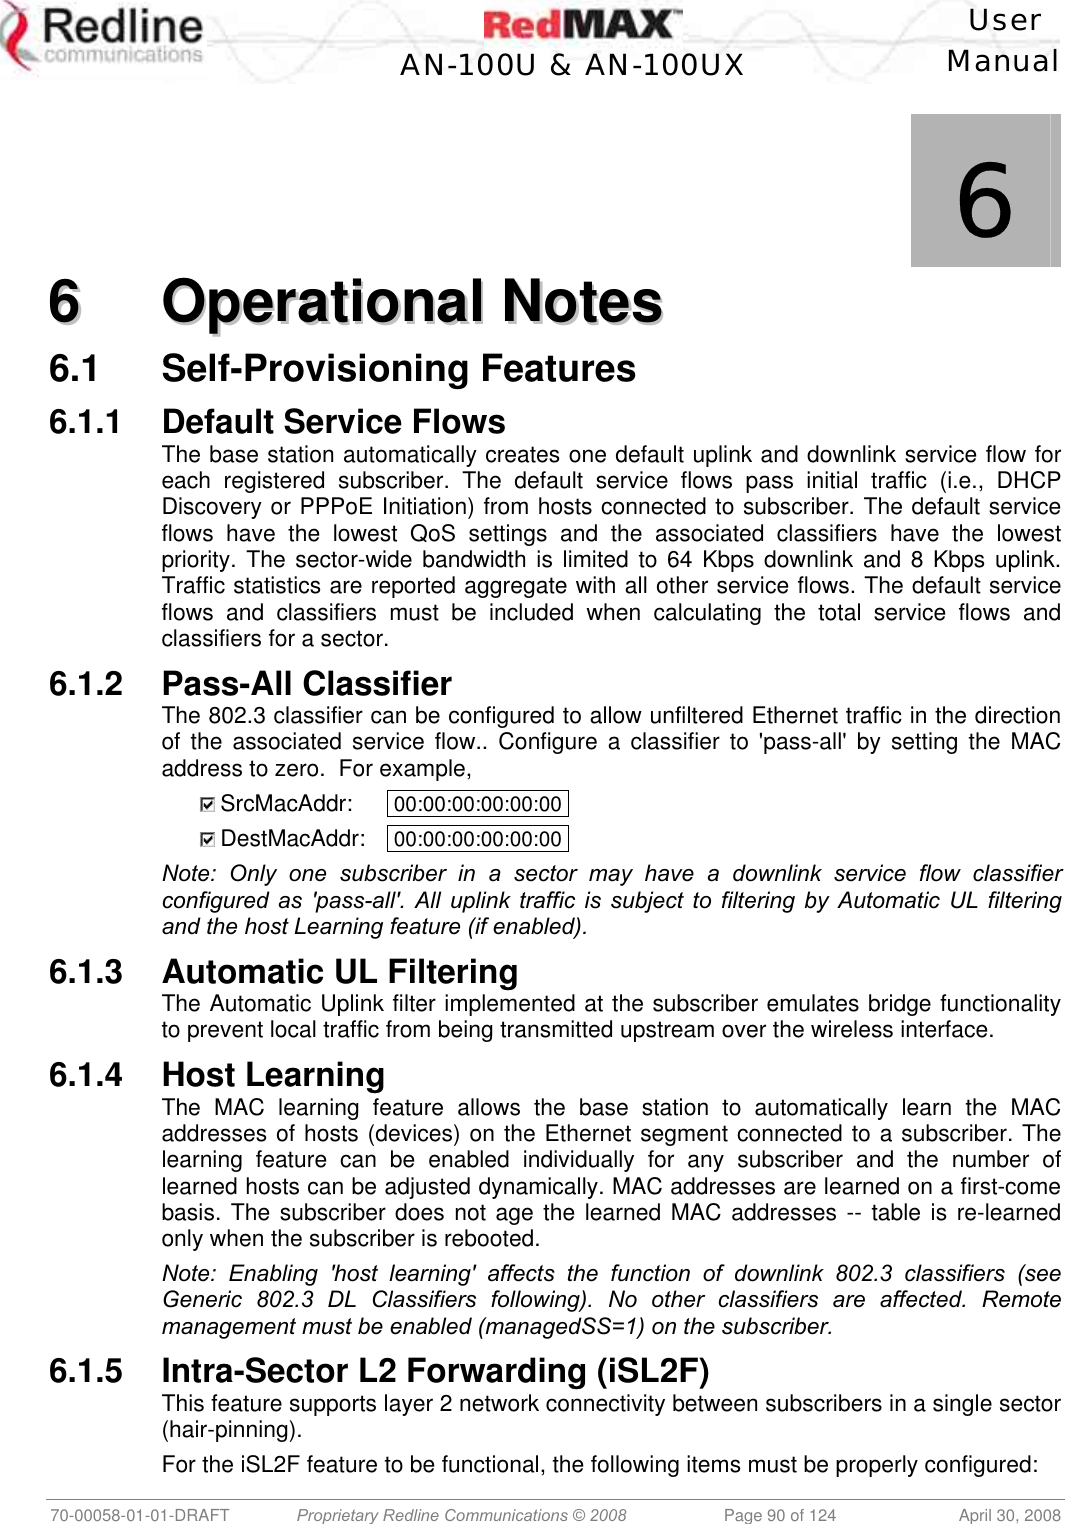    User  AN-100U &amp; AN-100UX Manual   70-00058-01-01-DRAFT  Proprietary Redline Communications © 2008   Page 90 of 124  April 30, 2008             6 66  OOppeerraattiioonnaall  NNootteess  6.1 Self-Provisioning Features 6.1.1 Default Service Flows The base station automatically creates one default uplink and downlink service flow for each registered subscriber. The default service flows pass initial traffic (i.e., DHCP Discovery or PPPoE Initiation) from hosts connected to subscriber. The default service flows have the lowest QoS settings and the associated classifiers have the lowest priority. The sector-wide bandwidth is limited to 64 Kbps downlink and 8 Kbps uplink. Traffic statistics are reported aggregate with all other service flows. The default service flows and classifiers must be included when calculating the total service flows and classifiers for a sector. 6.1.2 Pass-All Classifier The 802.3 classifier can be configured to allow unfiltered Ethernet traffic in the direction of the associated service flow.. Configure a classifier to &apos;pass-all&apos; by setting the MAC address to zero.  For example,    SrcMacAddr:   00:00:00:00:00:00 .   DestMacAddr:   00:00:00:00:00:00 . Note: Only one subscriber in a sector may have a downlink service flow classifier configured as &apos;pass-all&apos;. All uplink traffic is subject to filtering by Automatic UL filtering and the host Learning feature (if enabled).  6.1.3  Automatic UL Filtering The Automatic Uplink filter implemented at the subscriber emulates bridge functionality to prevent local traffic from being transmitted upstream over the wireless interface. 6.1.4 Host Learning The MAC learning feature allows the base station to automatically learn the MAC addresses of hosts (devices) on the Ethernet segment connected to a subscriber. The learning feature can be enabled individually for any subscriber and the number of learned hosts can be adjusted dynamically. MAC addresses are learned on a first-come basis. The subscriber does not age the learned MAC addresses -- table is re-learned only when the subscriber is rebooted.  Note: Enabling &apos;host learning&apos; affects the function of downlink 802.3 classifiers (see Generic 802.3 DL Classifiers following). No other classifiers are affected. Remote management must be enabled (managedSS=1) on the subscriber. 6.1.5  Intra-Sector L2 Forwarding (iSL2F) This feature supports layer 2 network connectivity between subscribers in a single sector (hair-pinning). For the iSL2F feature to be functional, the following items must be properly configured: 